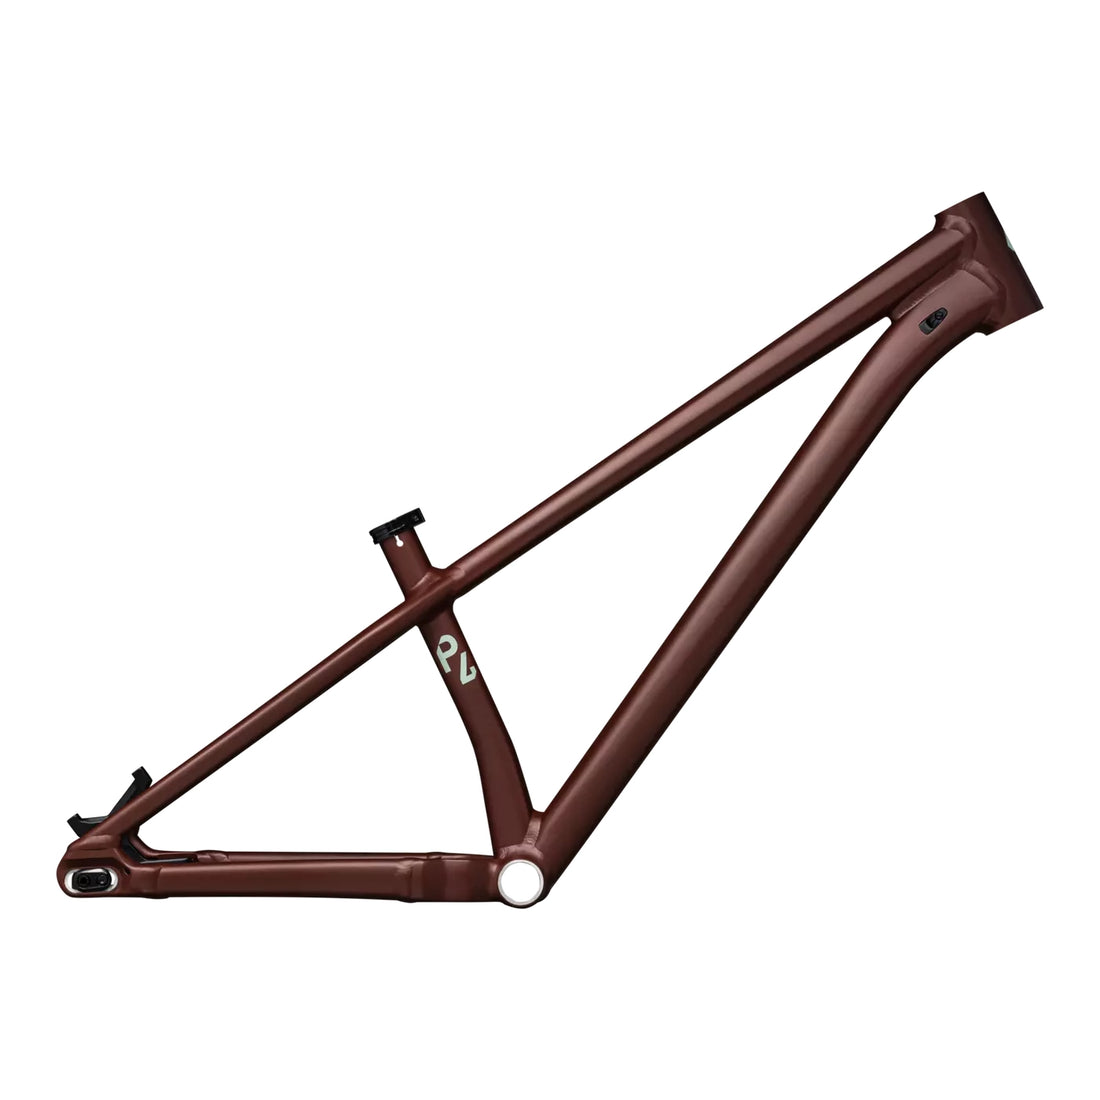 Specialized P.4 Dirt Jump Frame